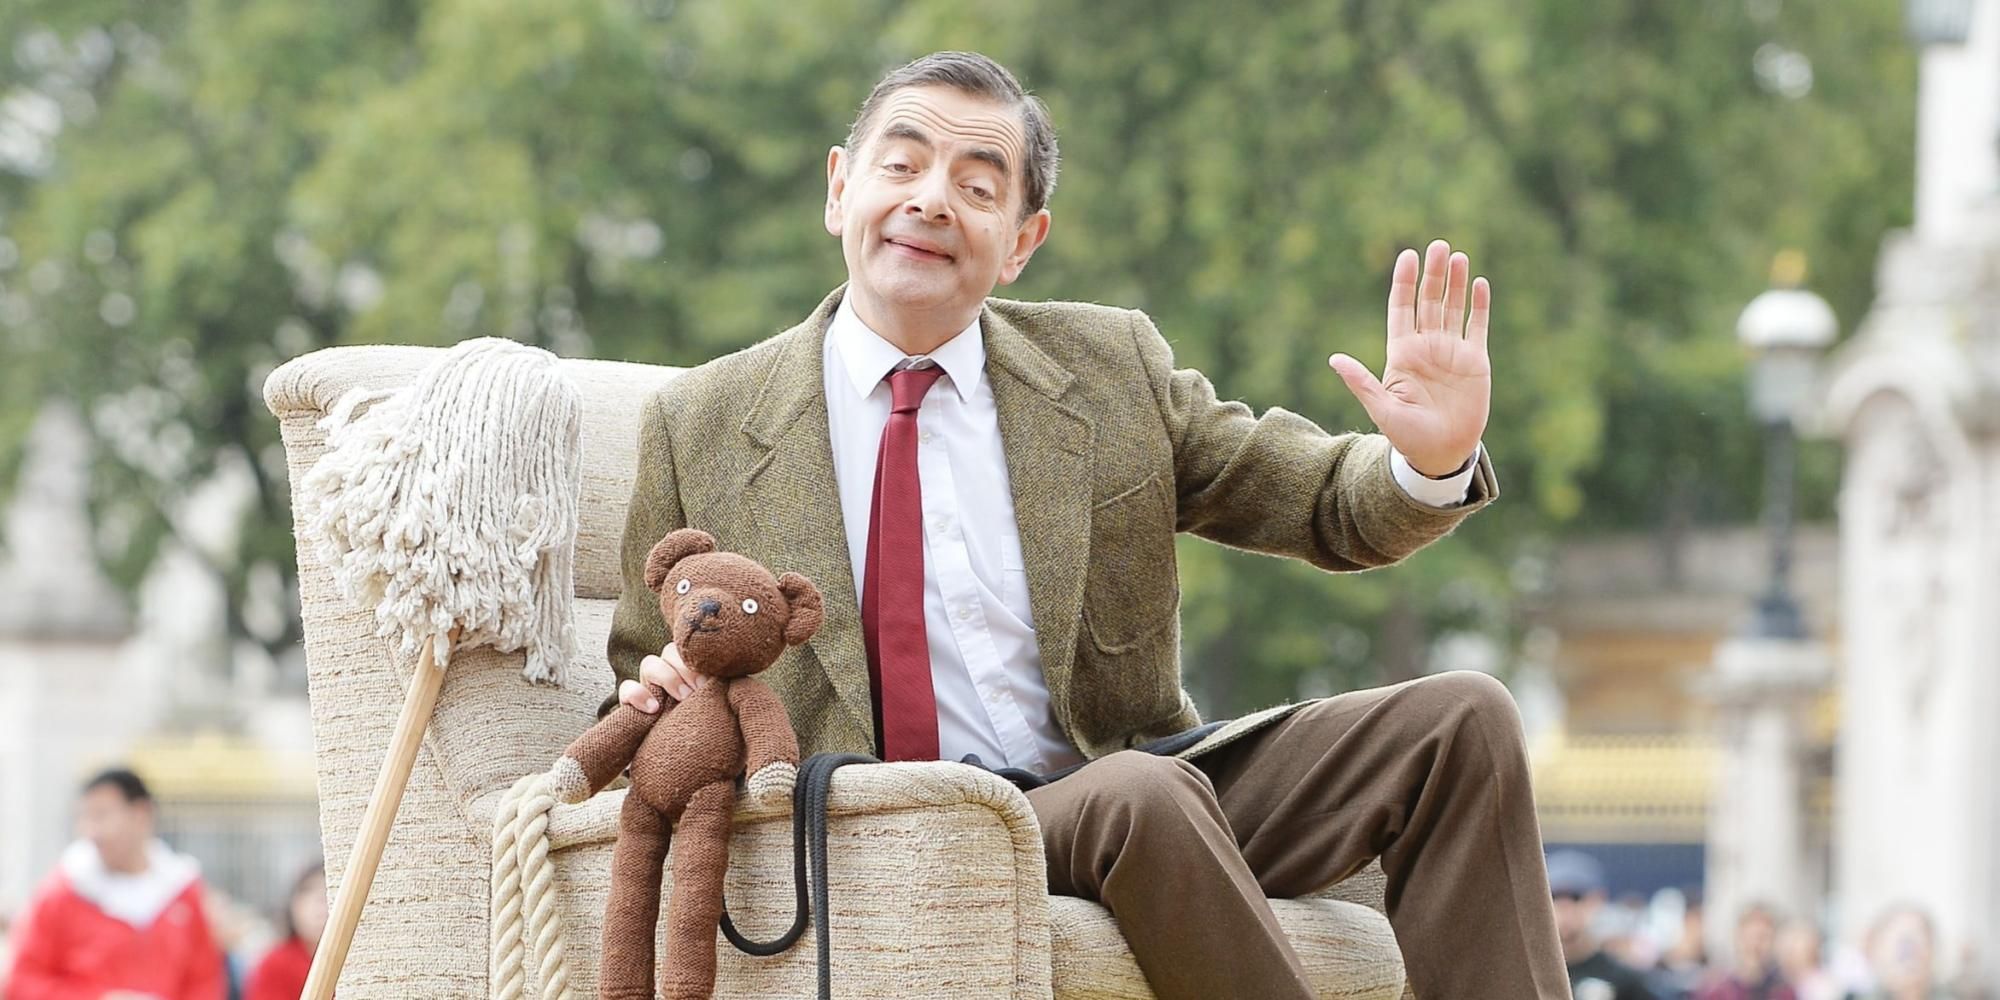 Mr. Bean with chair and mop